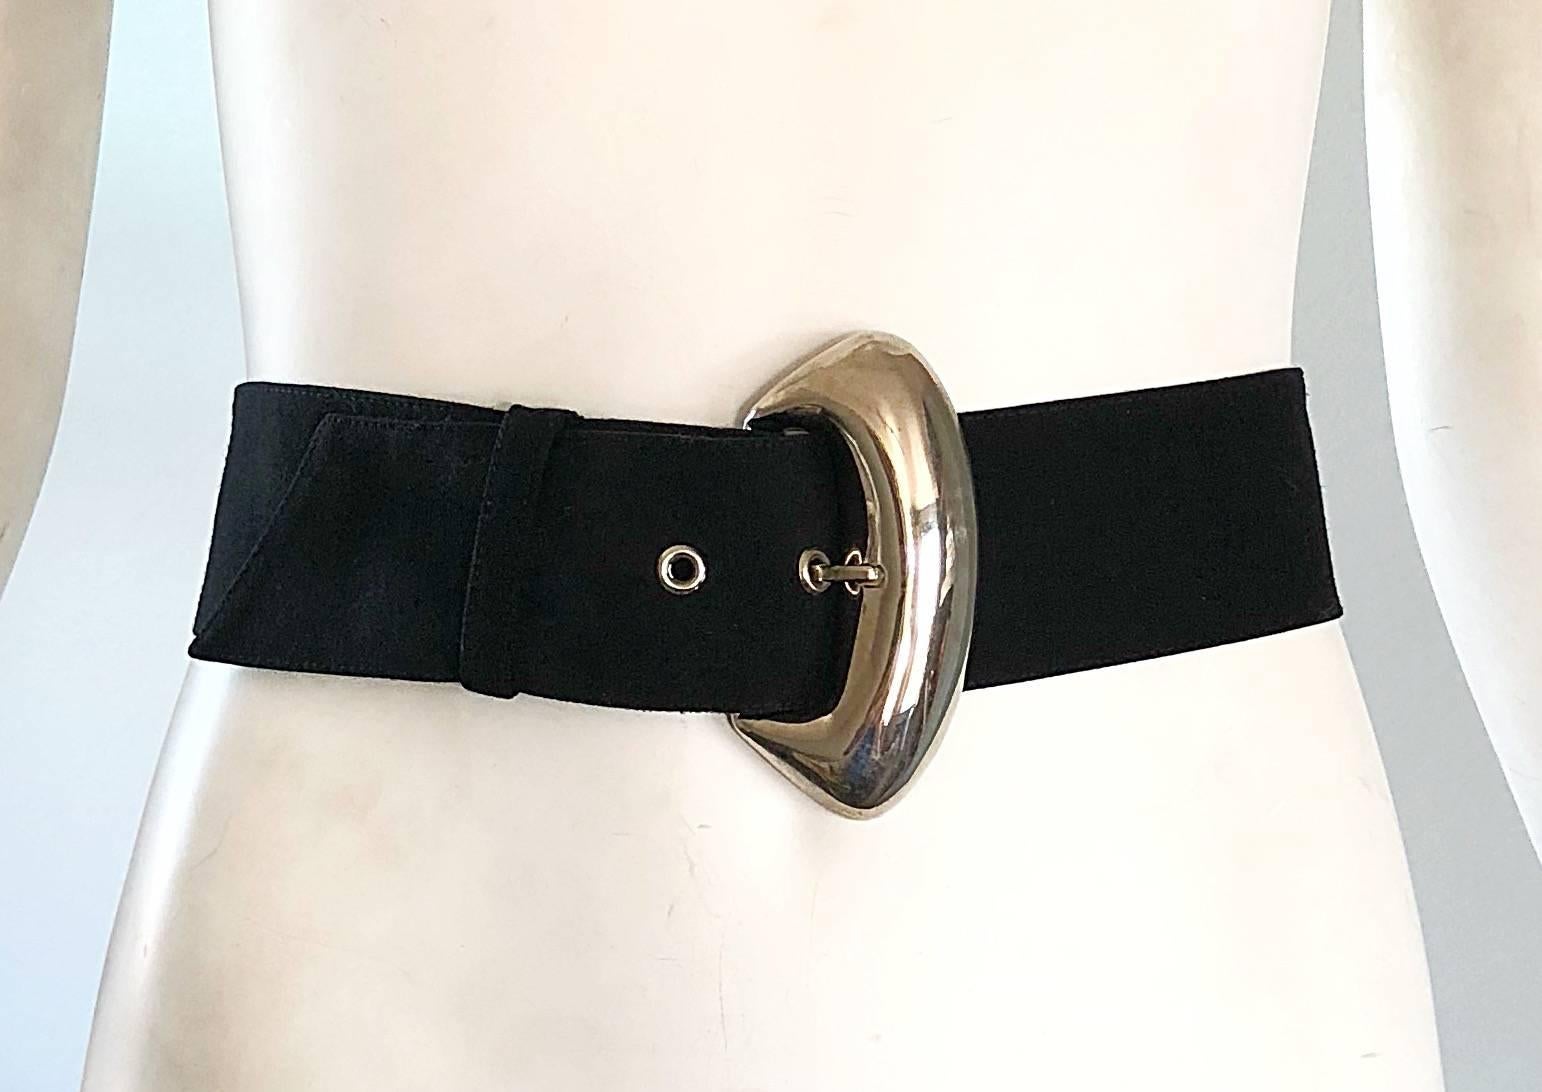 Chic 1990s THIERRY MUGLER Avant Garde black wool belt! Features a large silver buckle. SIgnature Mugler shapes on both the buckle and belt. Classic black belt that will never go out of style, and can easily be dressed up or down. Great with jeans, a